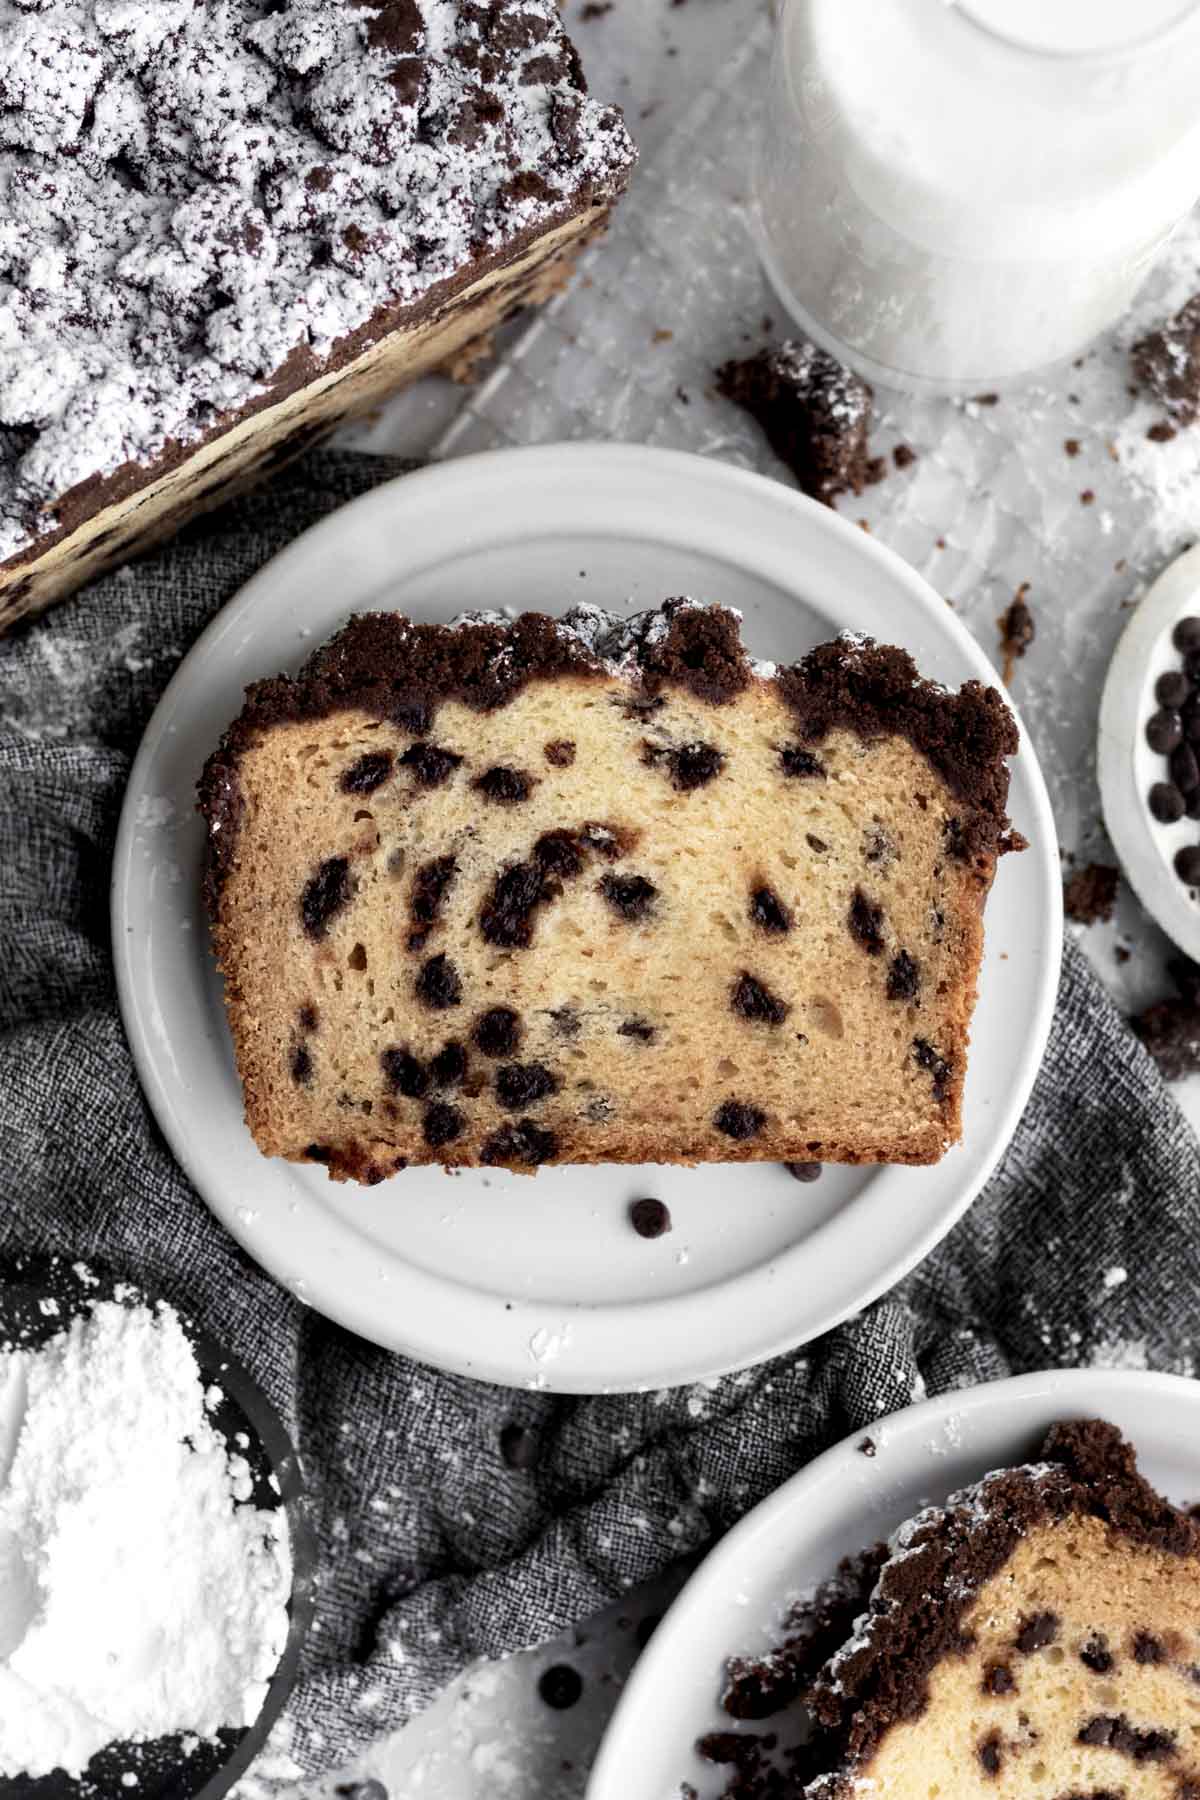 A slice of Chocolate Chip Loaf Cake on a plate.